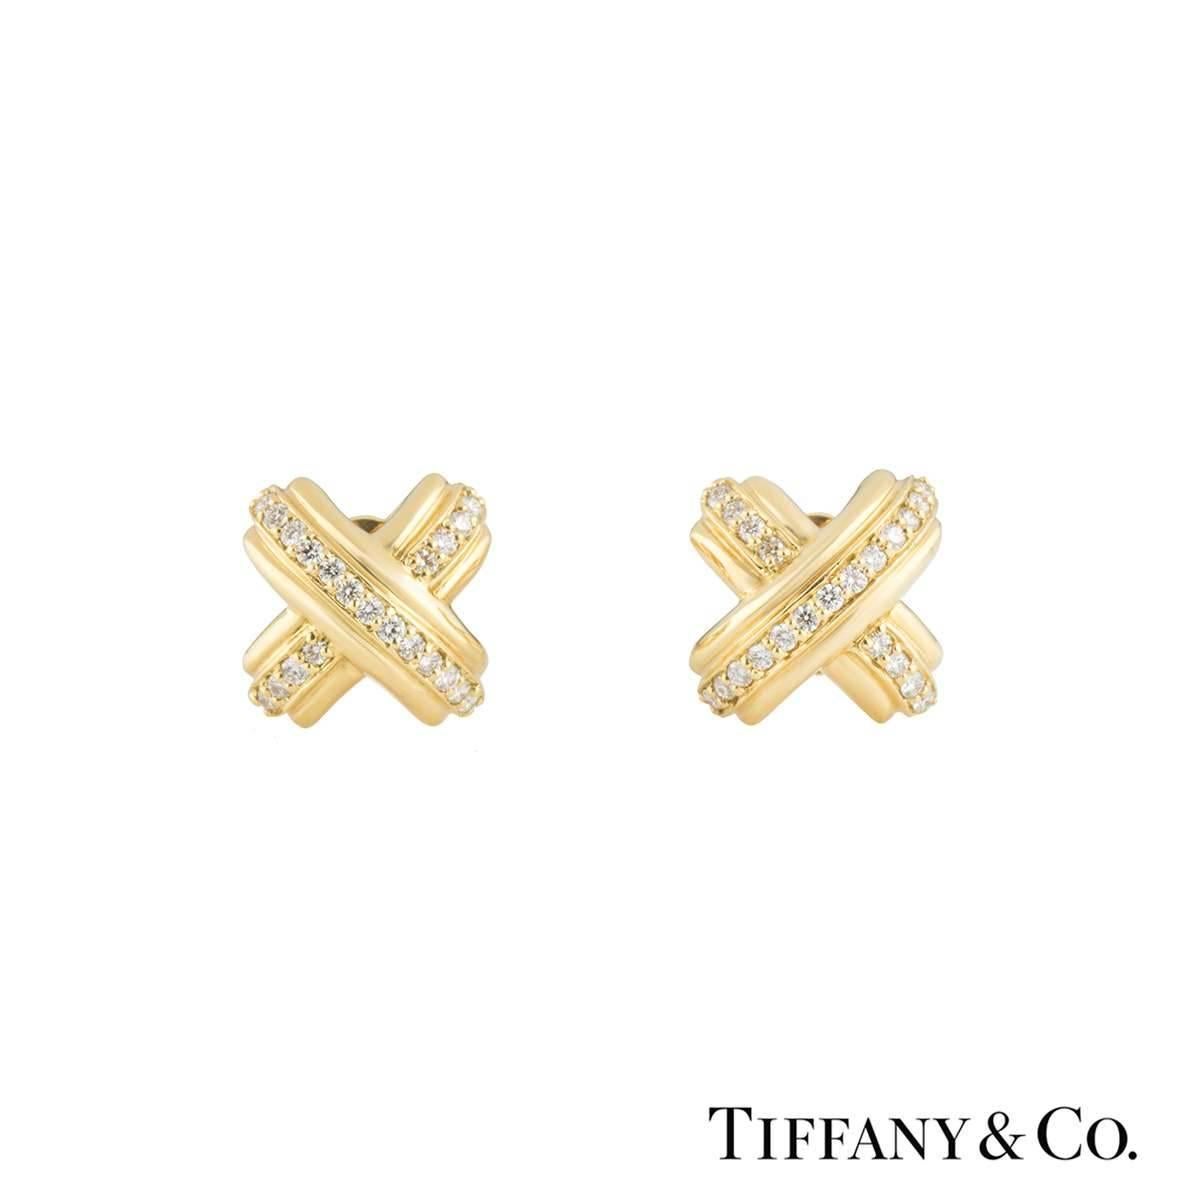 A pair of 18k yellow gold Tiffany & Co. diamond set cufflinks. The cufflinks are composed of the Signature 'X' cross motif, each set with 21 round brilliant cut diamonds, totalling approximately 0.55ct, G colour and VS clarity. The cufflinks